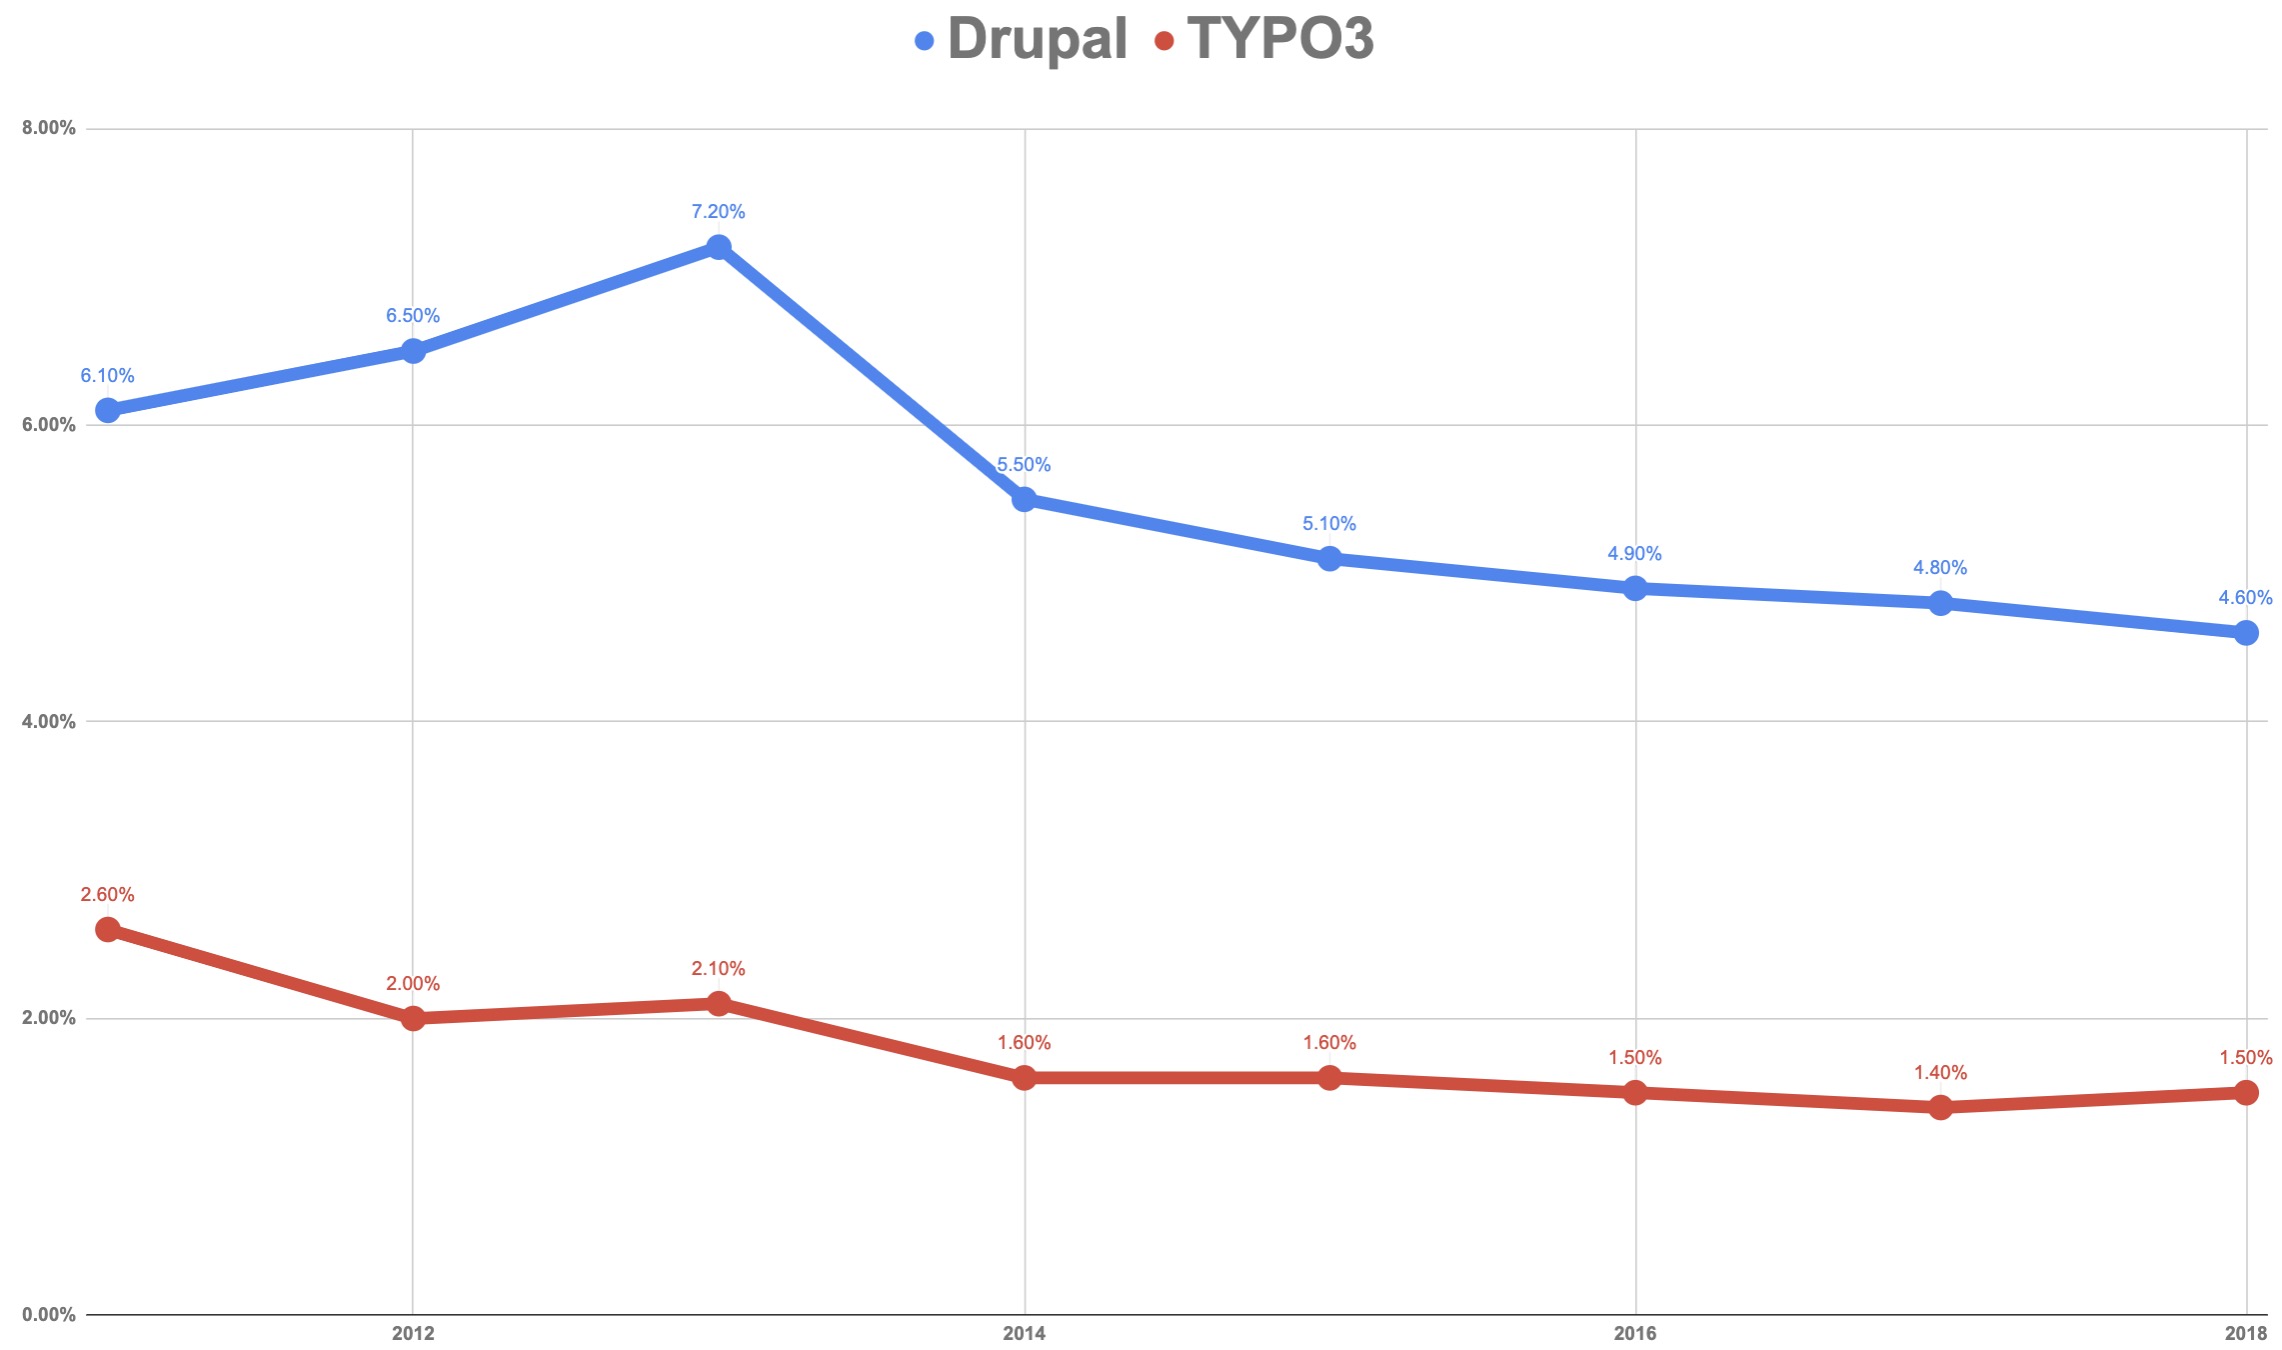 market share chart of Drupal and TYPO3